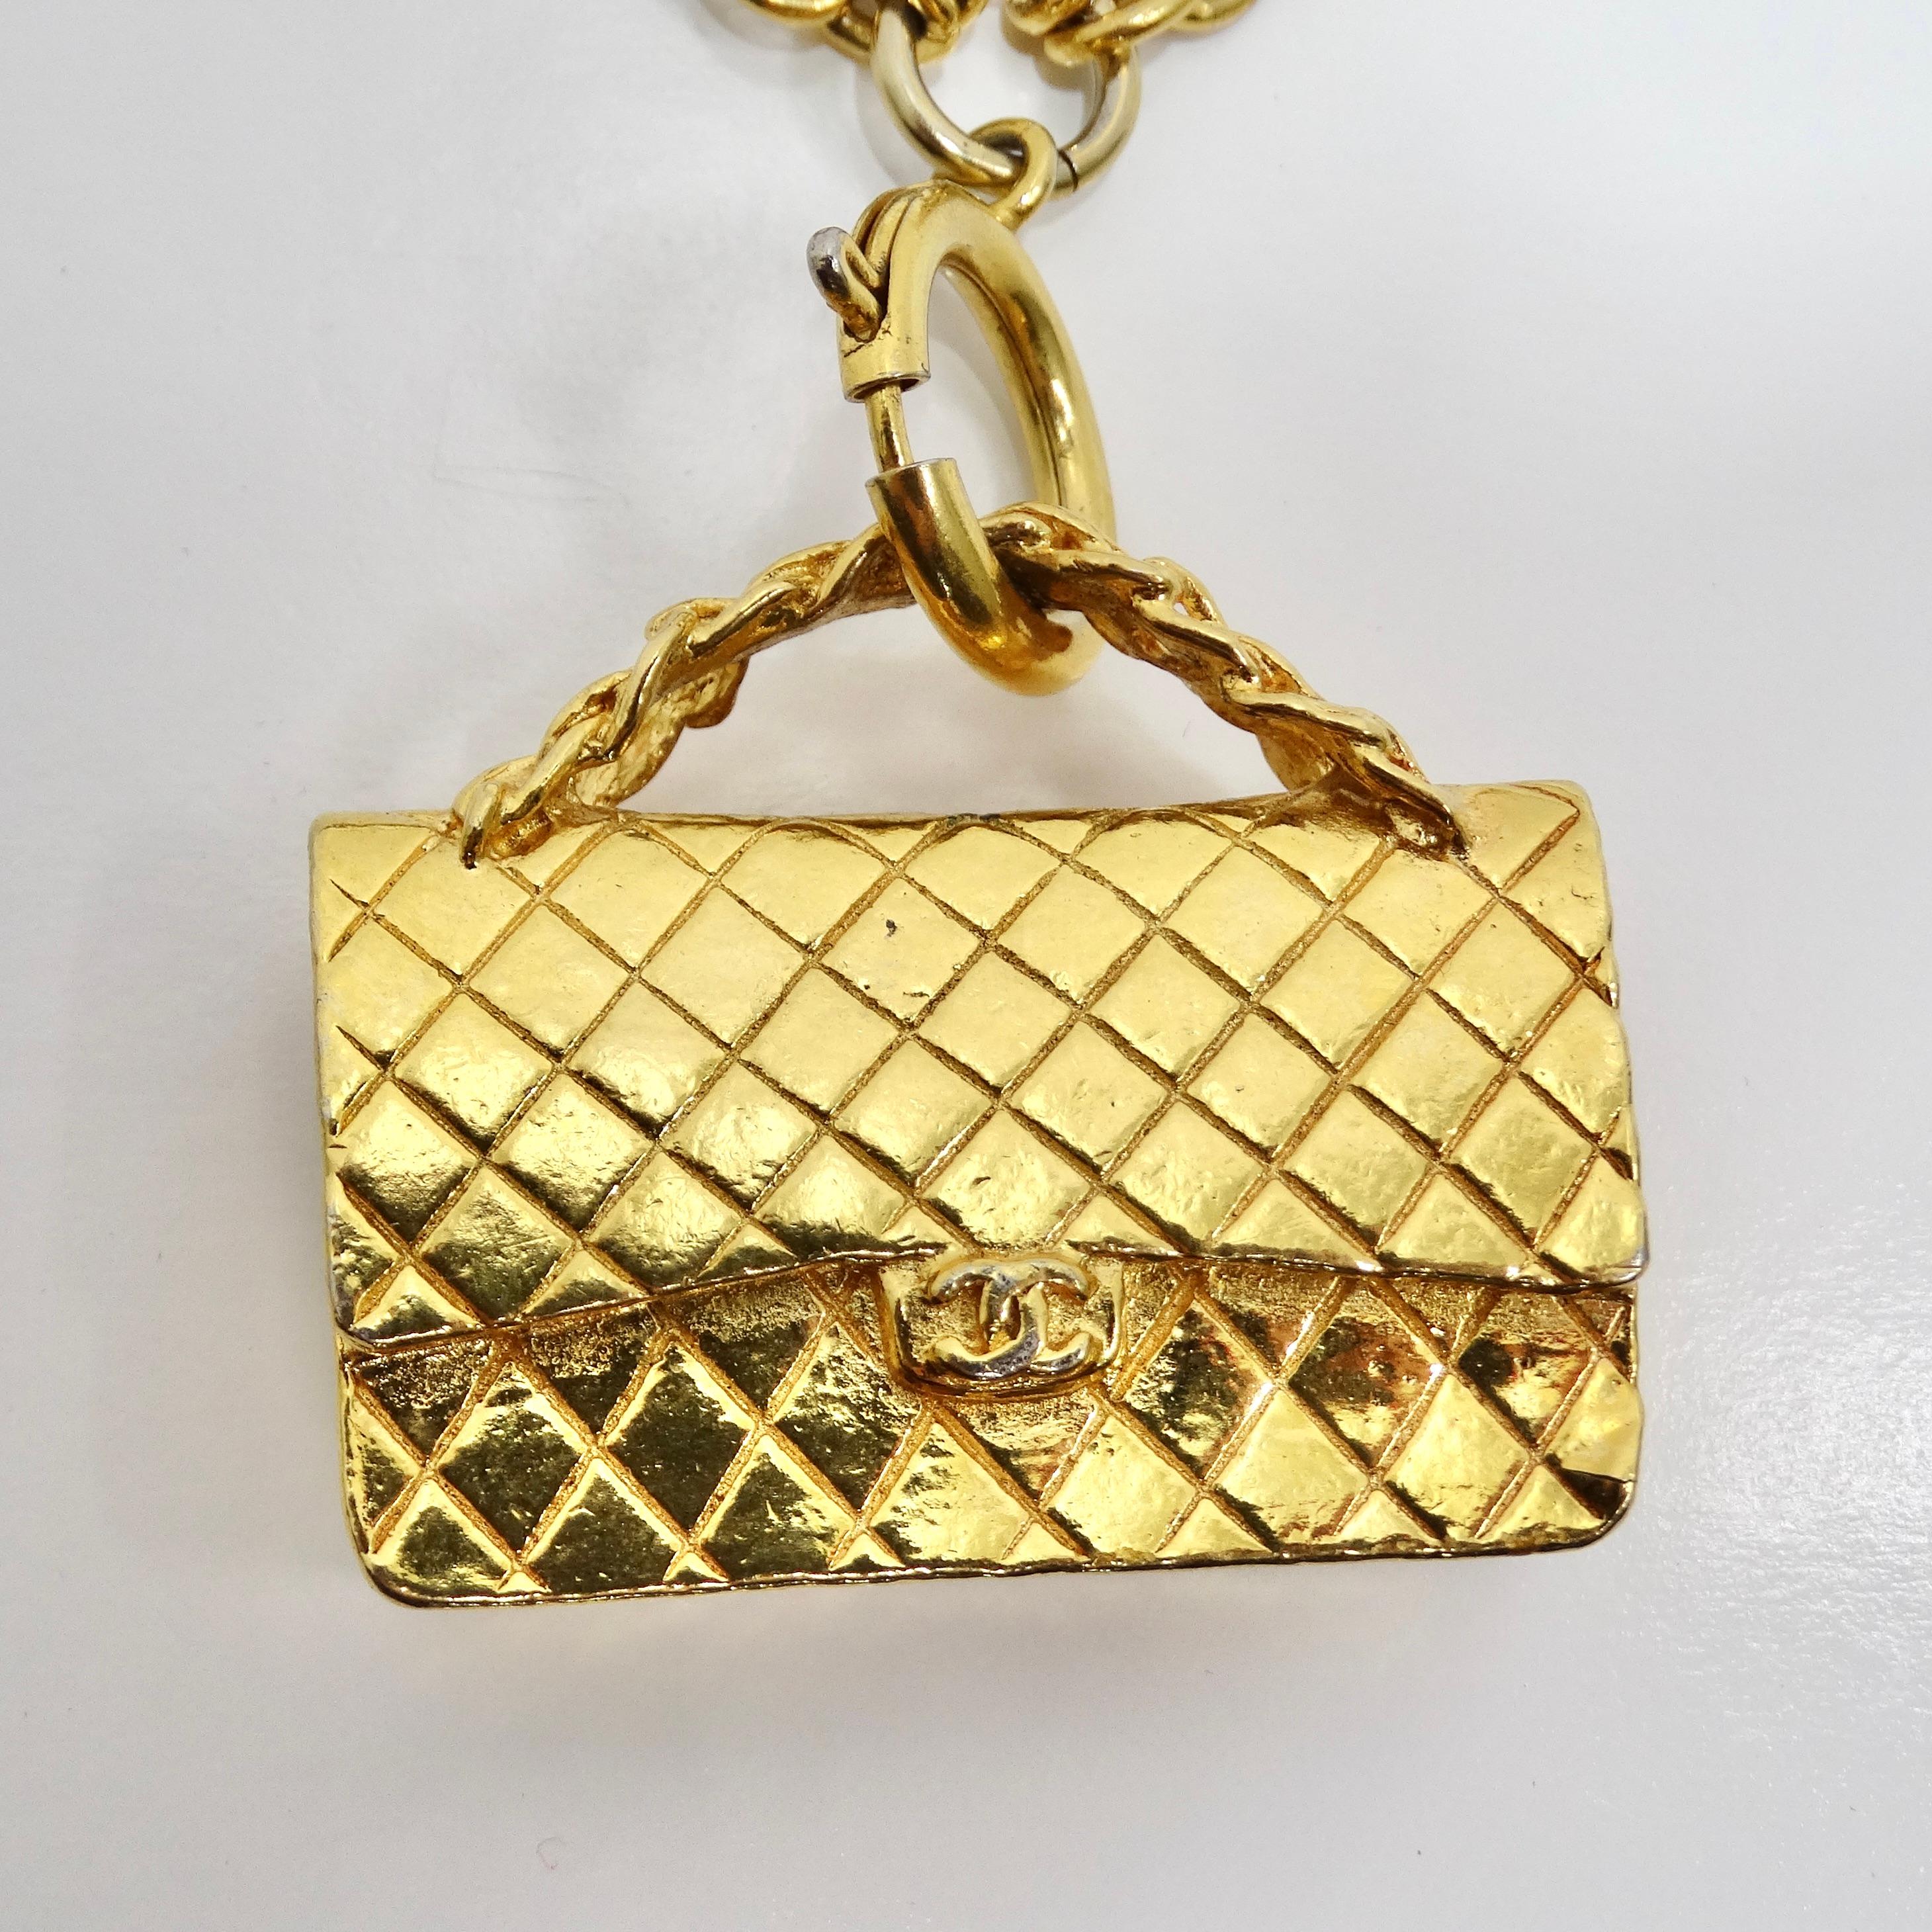 Chanel 1980s Gold Tone Flap Bag Necklace In Excellent Condition For Sale In Scottsdale, AZ